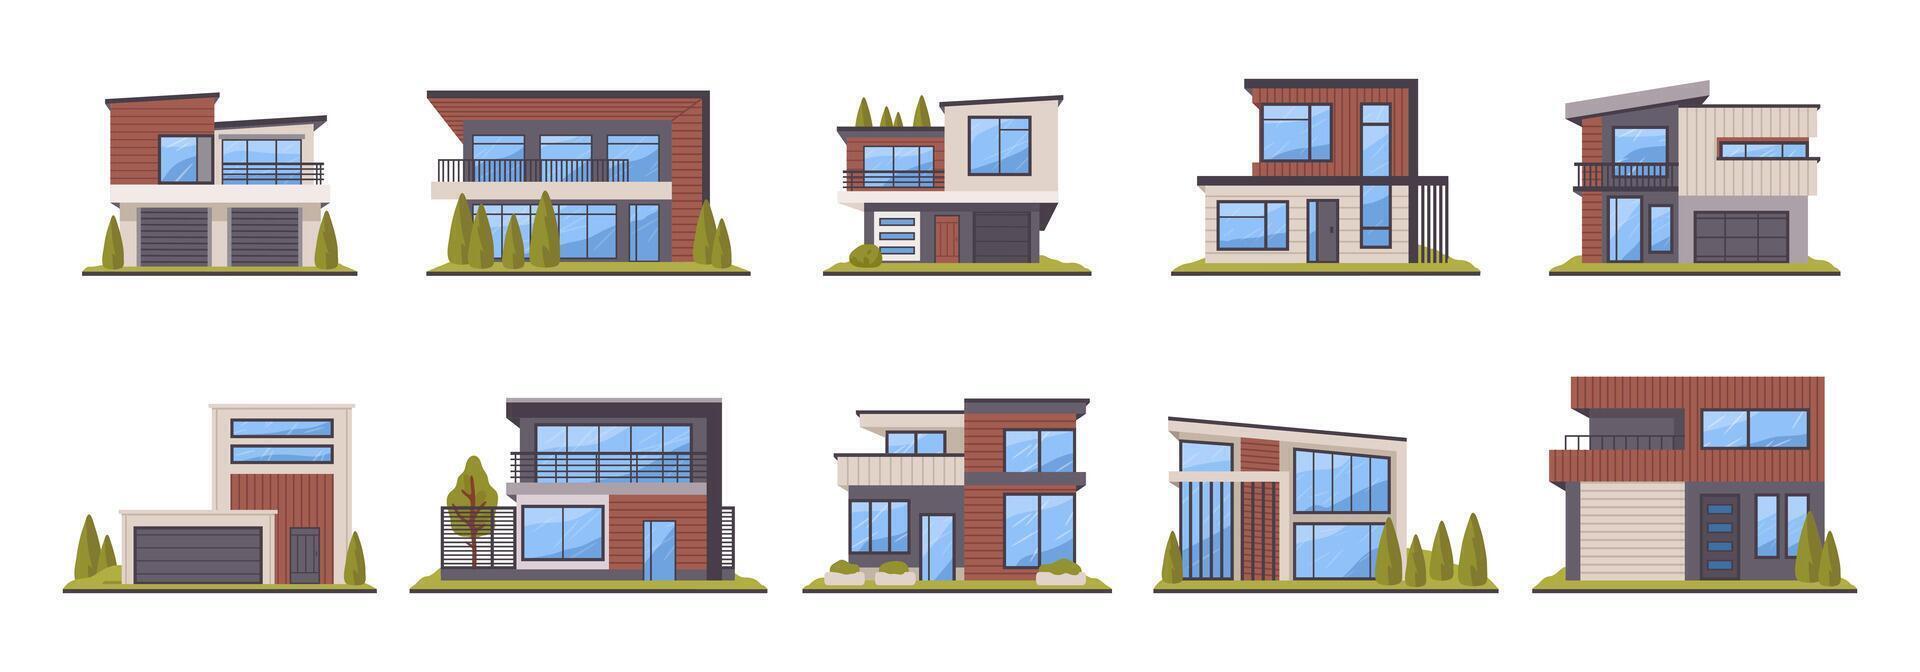 Modern houses. Suburban real estate architecture, contemporary residential buildings, urban cottages, country houses flat illustration set. Hand drawn house collection vector